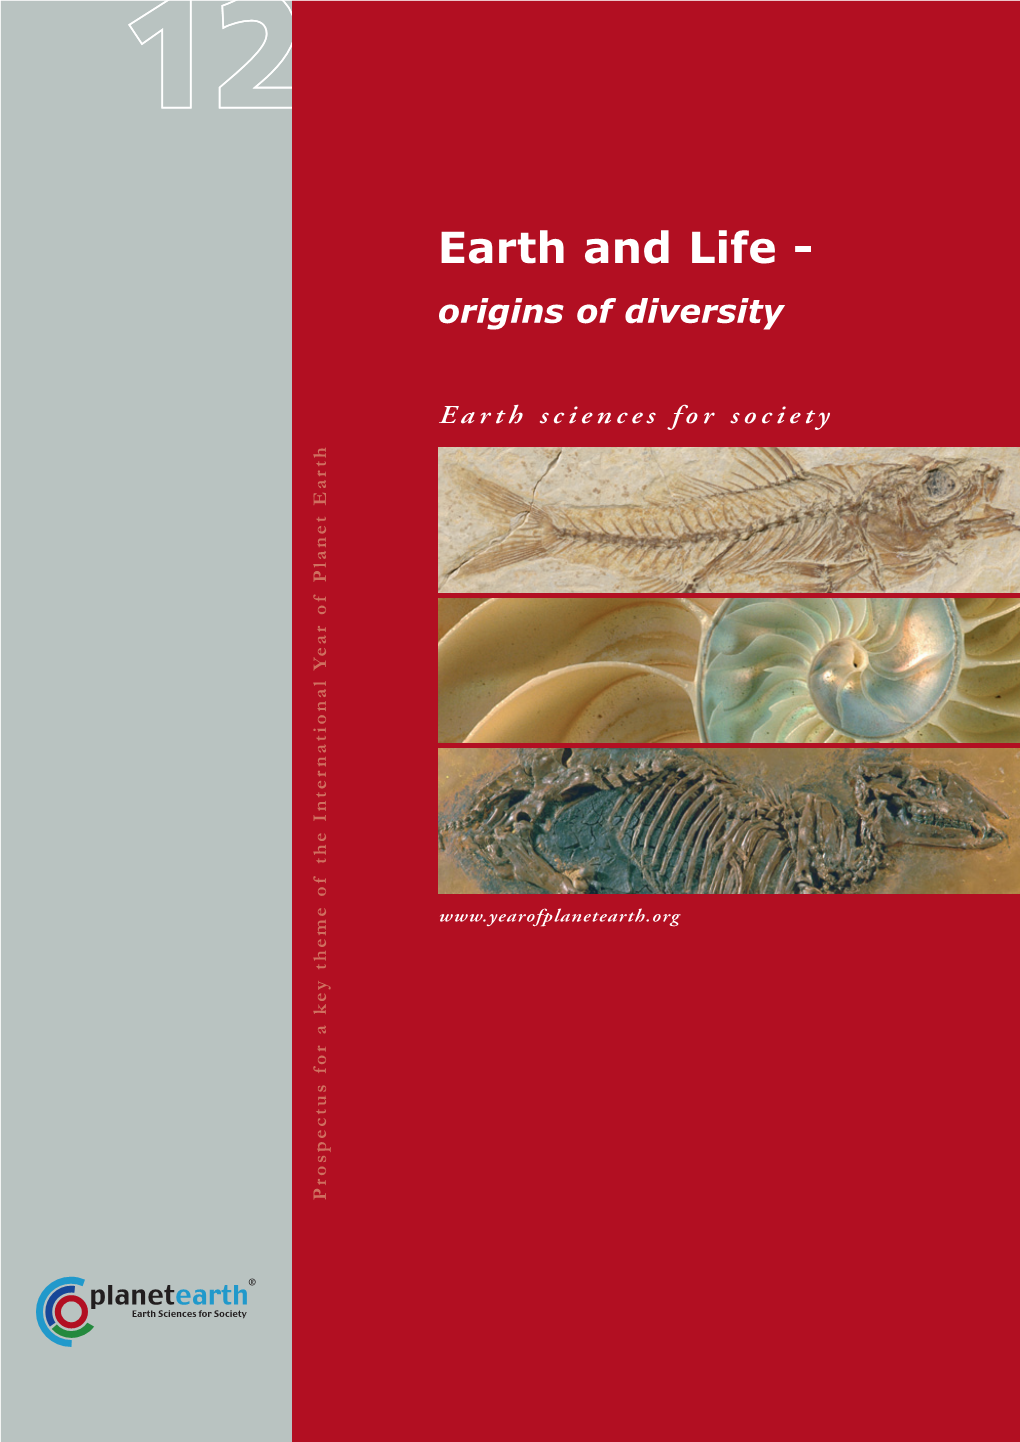 Earth and Life Sciences